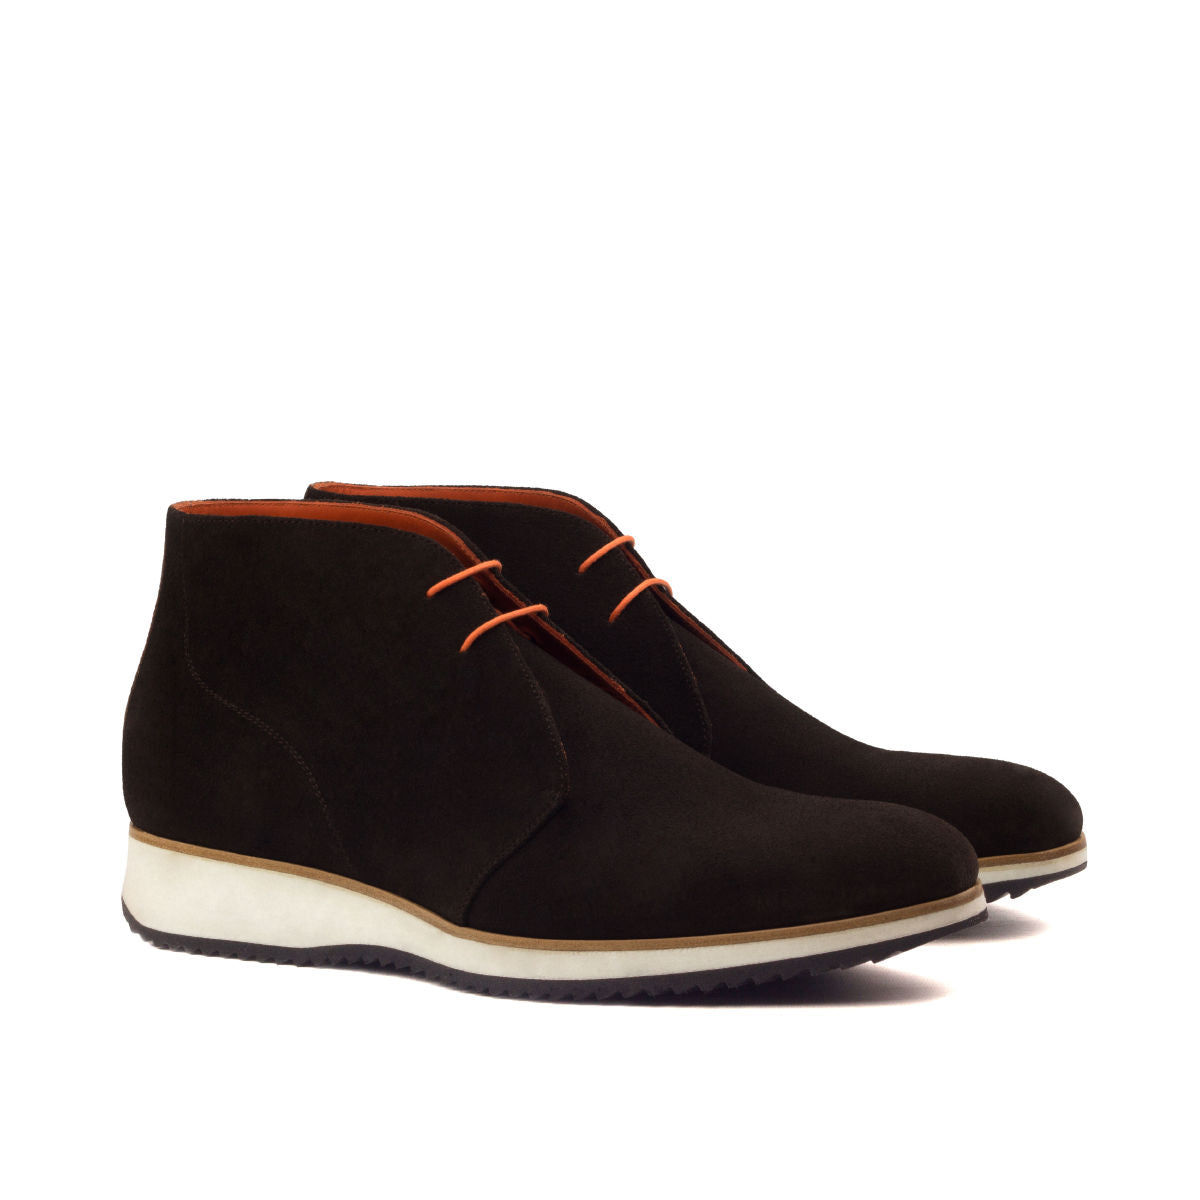 Brown Suede Chukka Boot with Running Sole